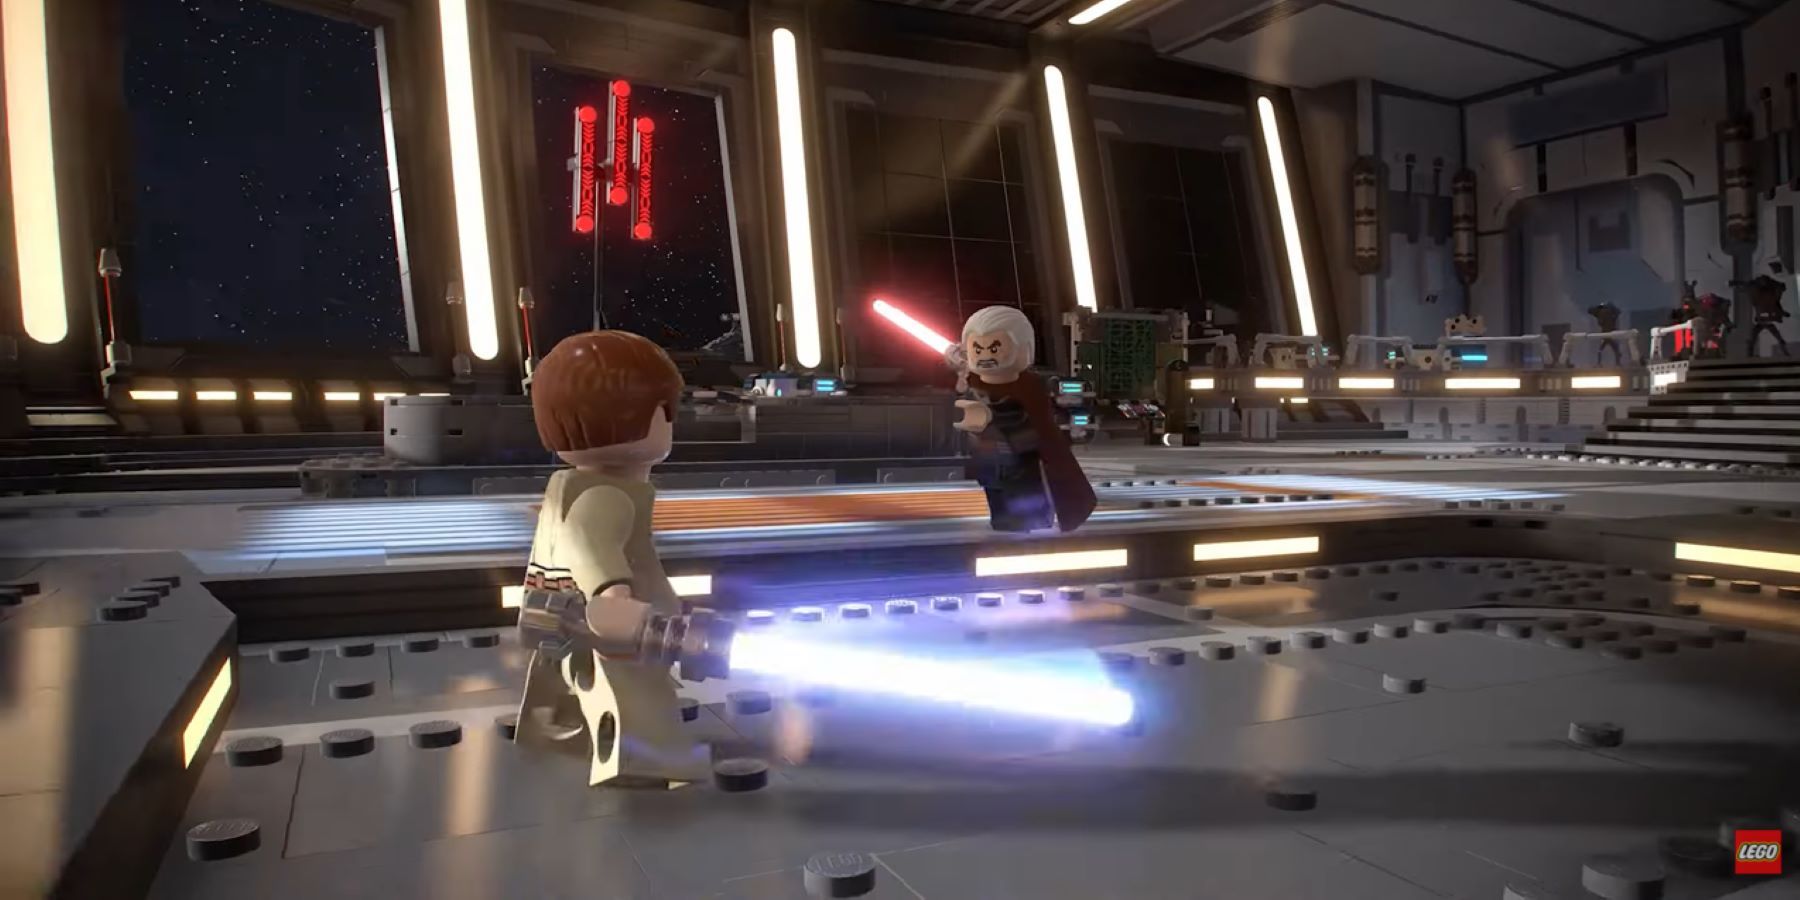 Obi-Wan Kenobi and Count Dooku fighting aboard a Separatist ship during the Star Wars Episode 3: Revenge of the Sith adaptation in LEGO Star Wars: The Skywalker Saga